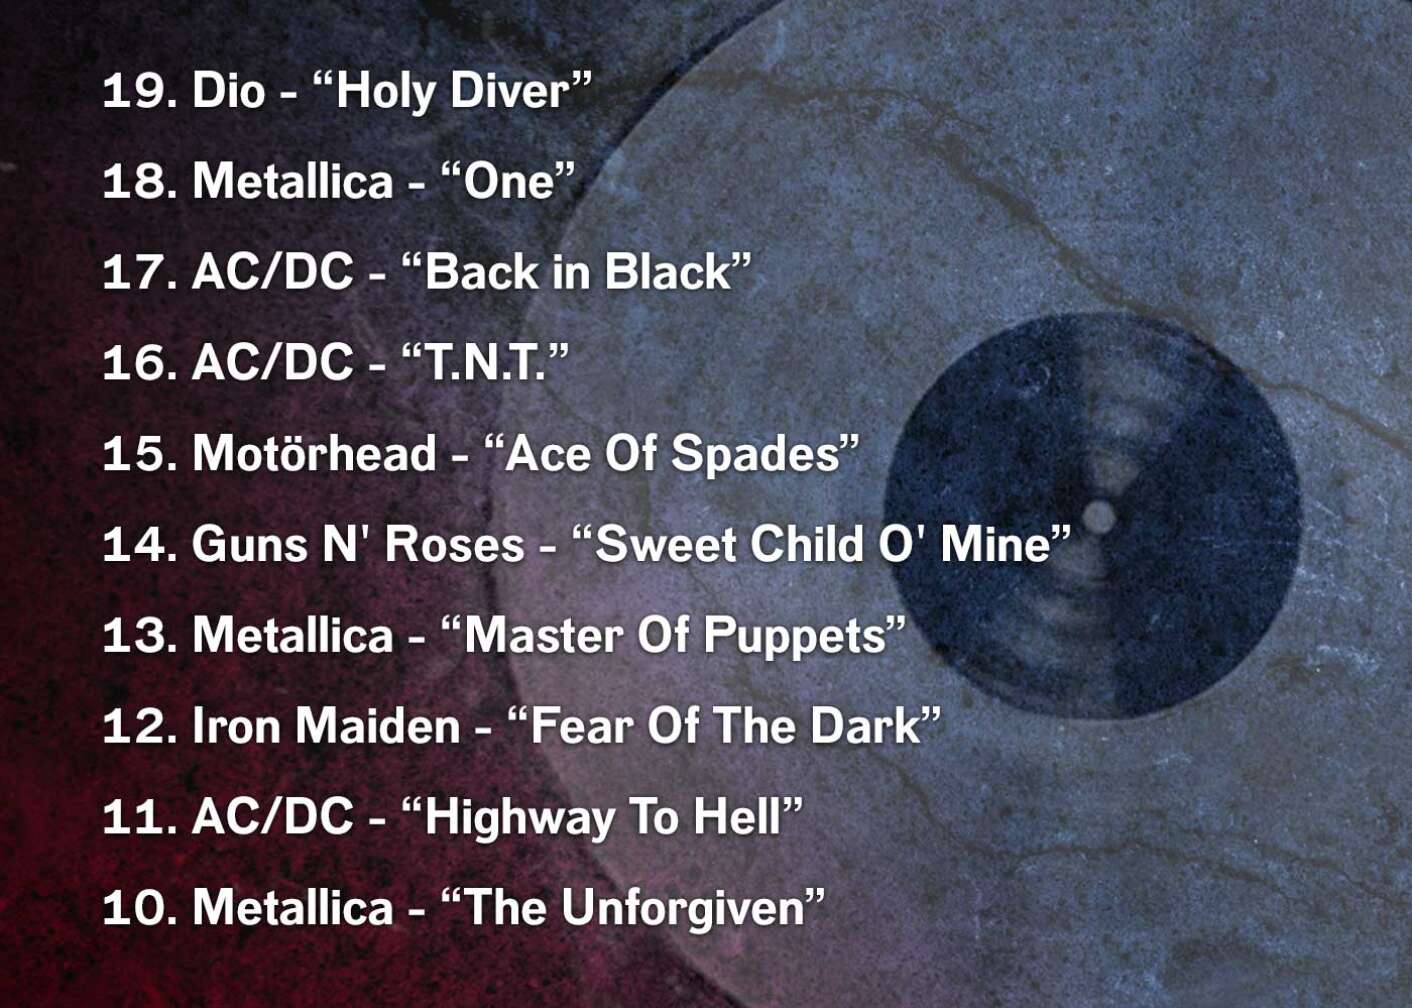 19. Dio - “Holy Diver” 18. Metallica - “One” 17. AC/DC - “Back in Black” 16. AC/DC - “T.N.T.” 15. Motörhead - “Ace Of Spades” 14. Guns N' Roses - “Sweet Child O' Mine” 13. Metallica - “Master Of Puppets” 12. Iron Maiden - “Fear Of The Dark” 11. AC/DC - “Highway To Hell” 10. Metallica - “The Unforgiven”